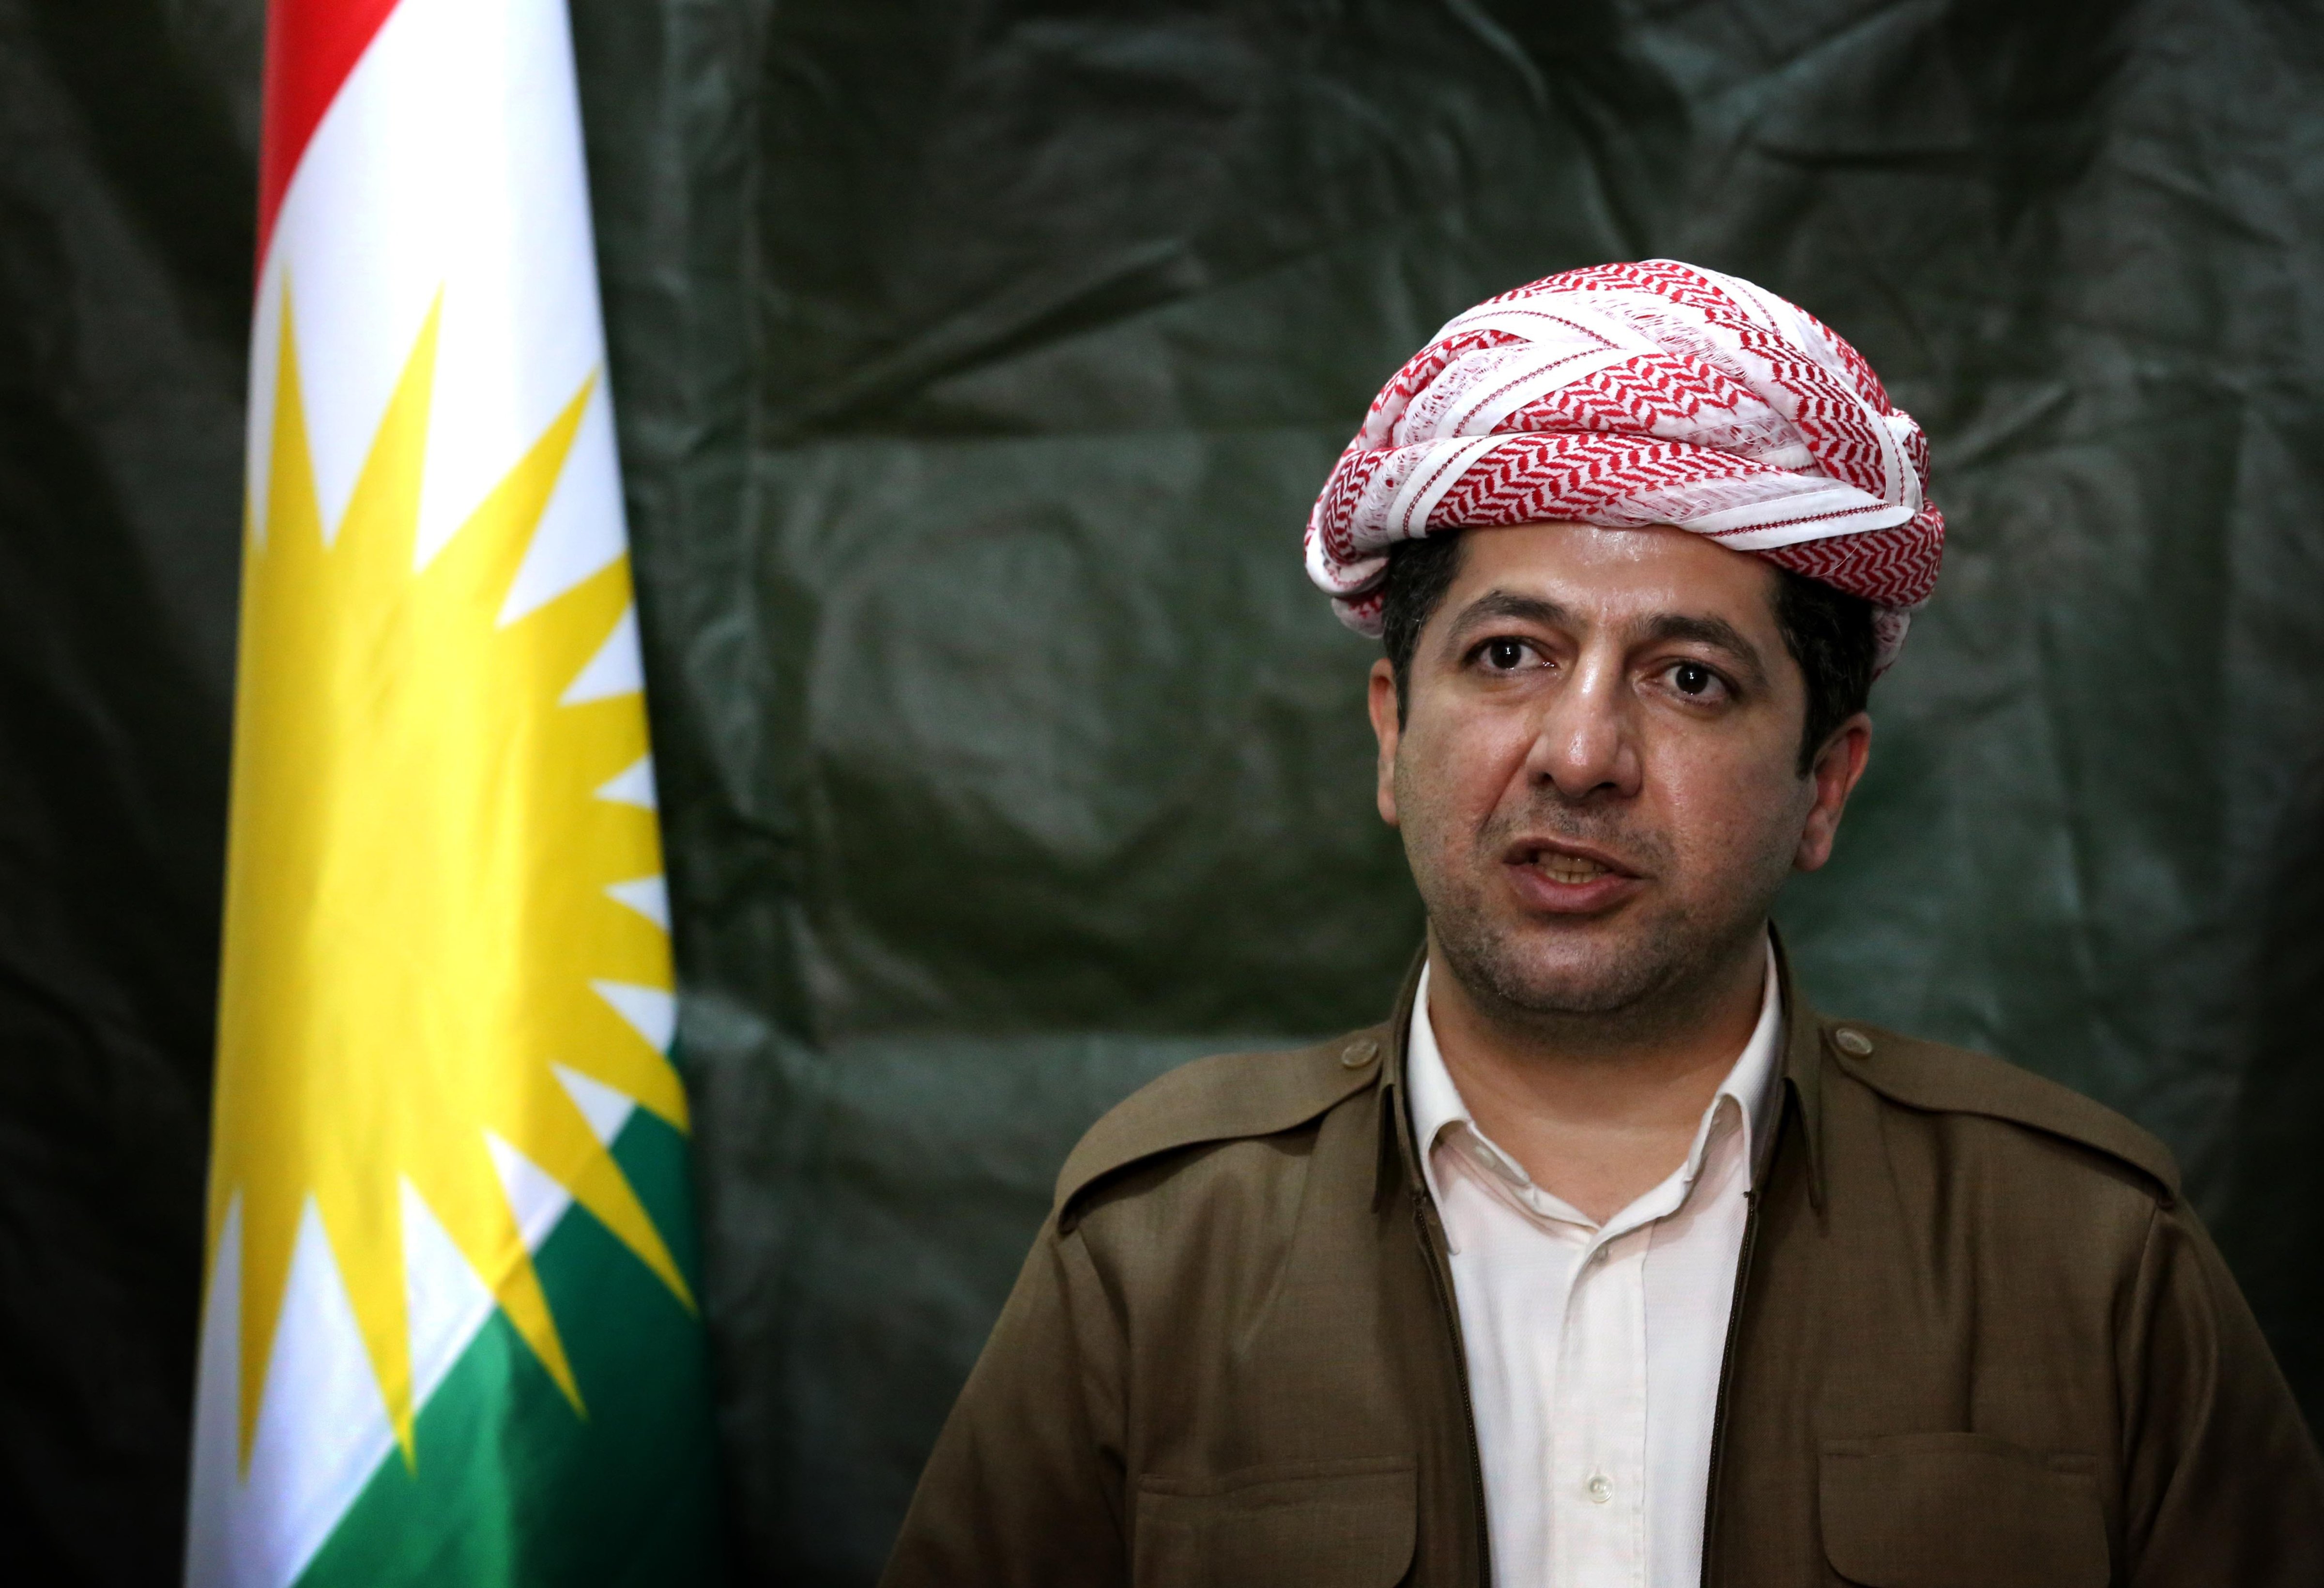 Masrour Barzani, chancellor of the Kurdistan Regional Security Council speaks during a press conference